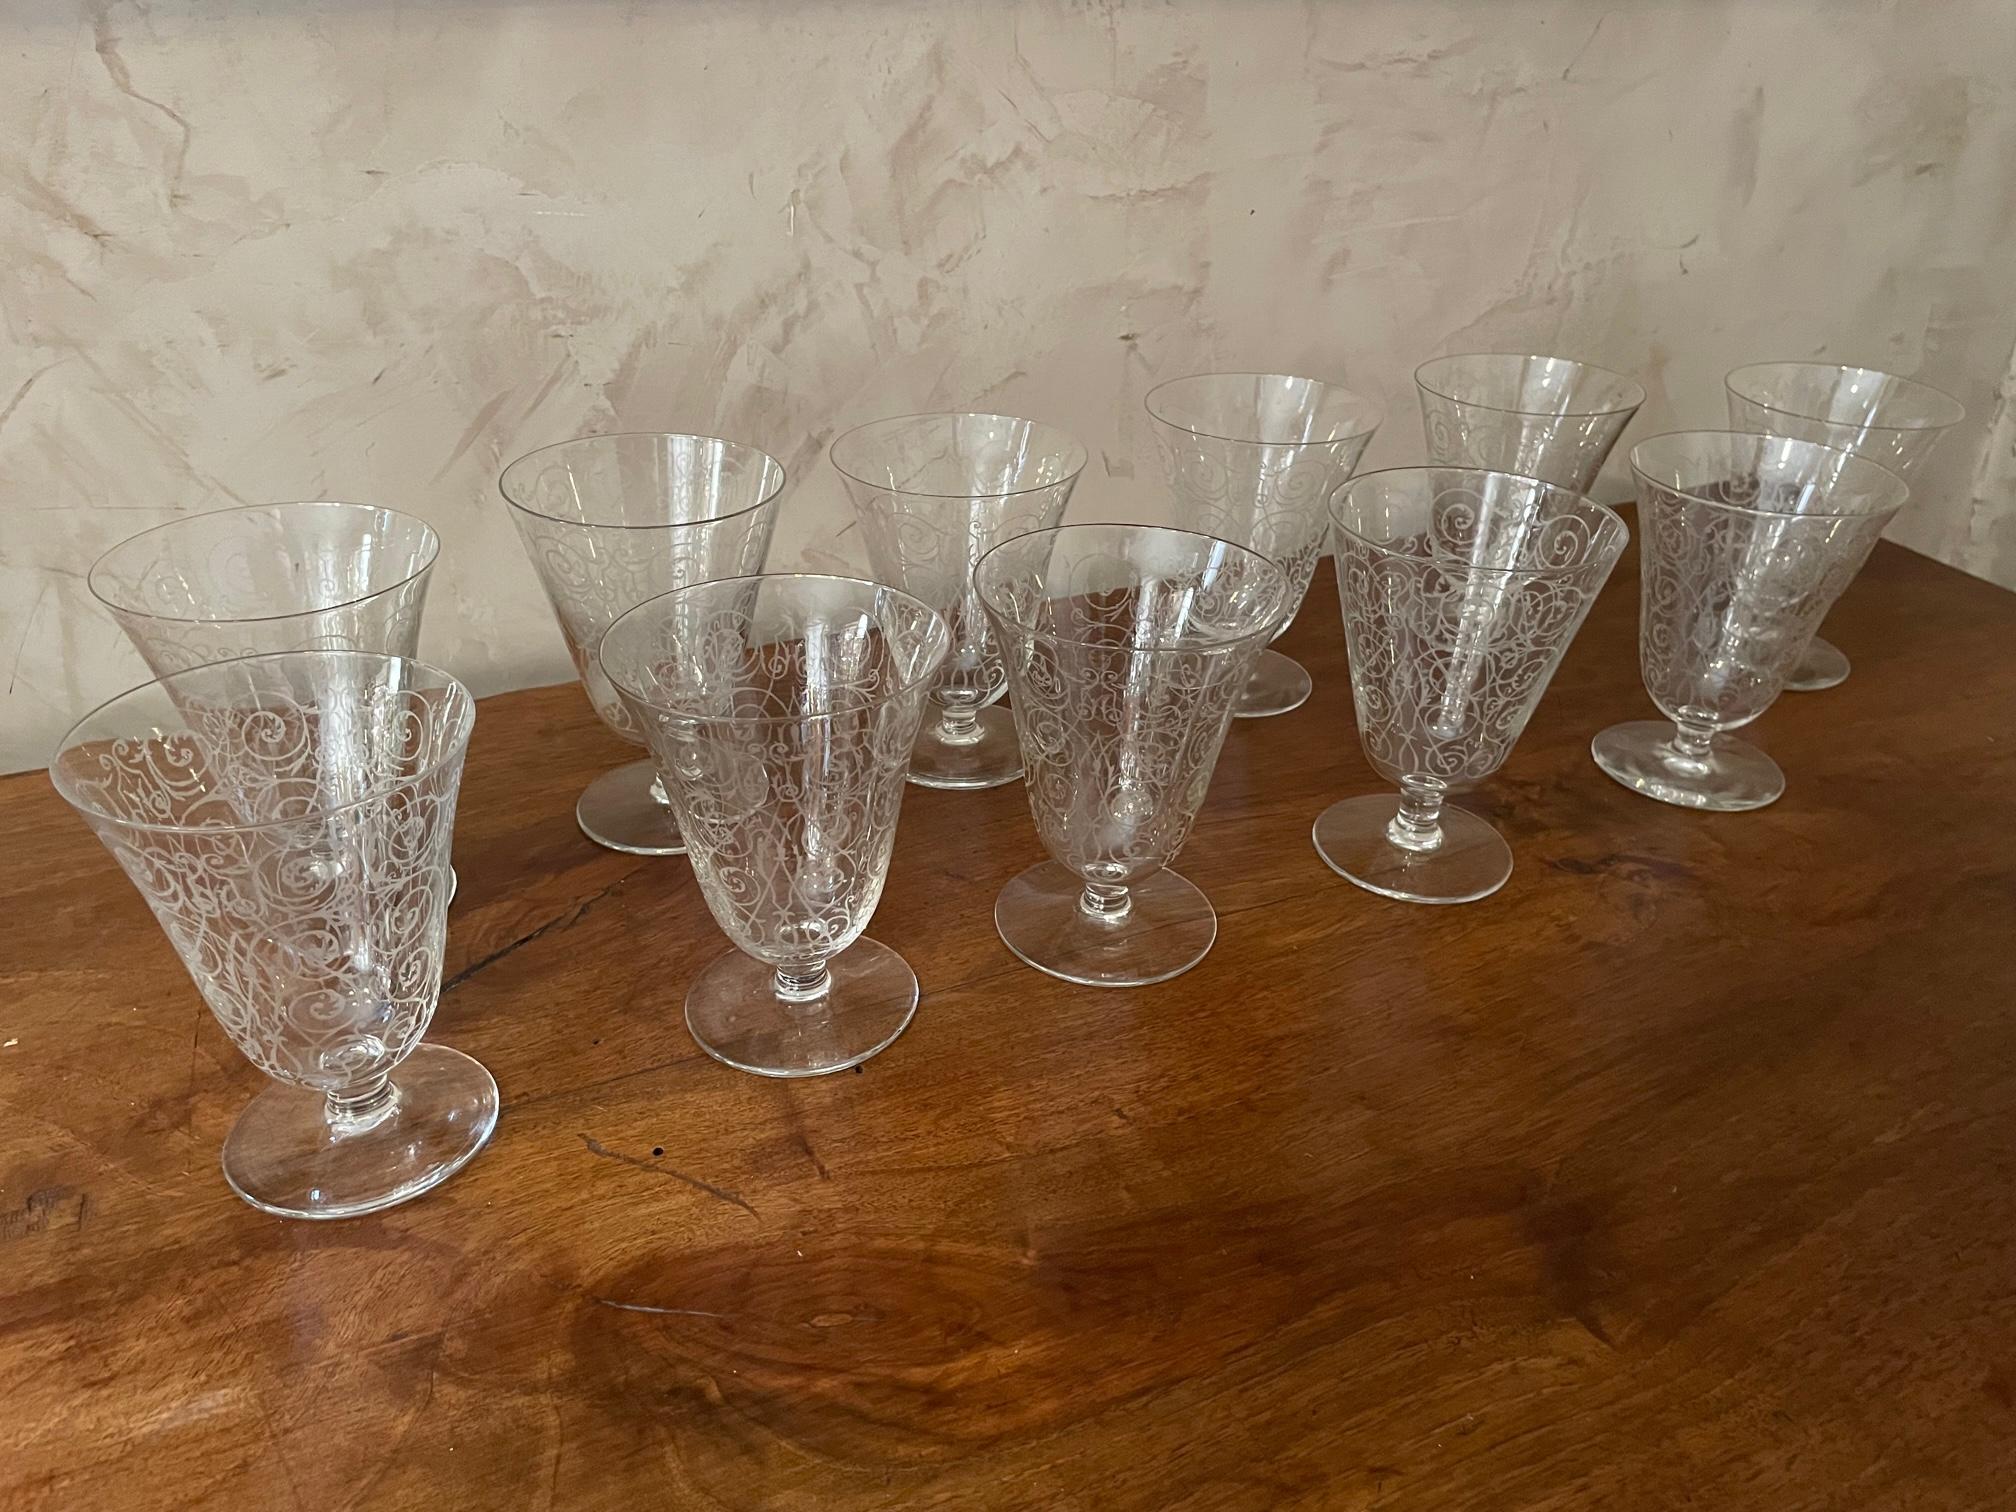 Set of 11 wine glasses in the style of the Michelangelo model from baccarat. 
Nice quality and good condition.
Very elegant and lightweight.